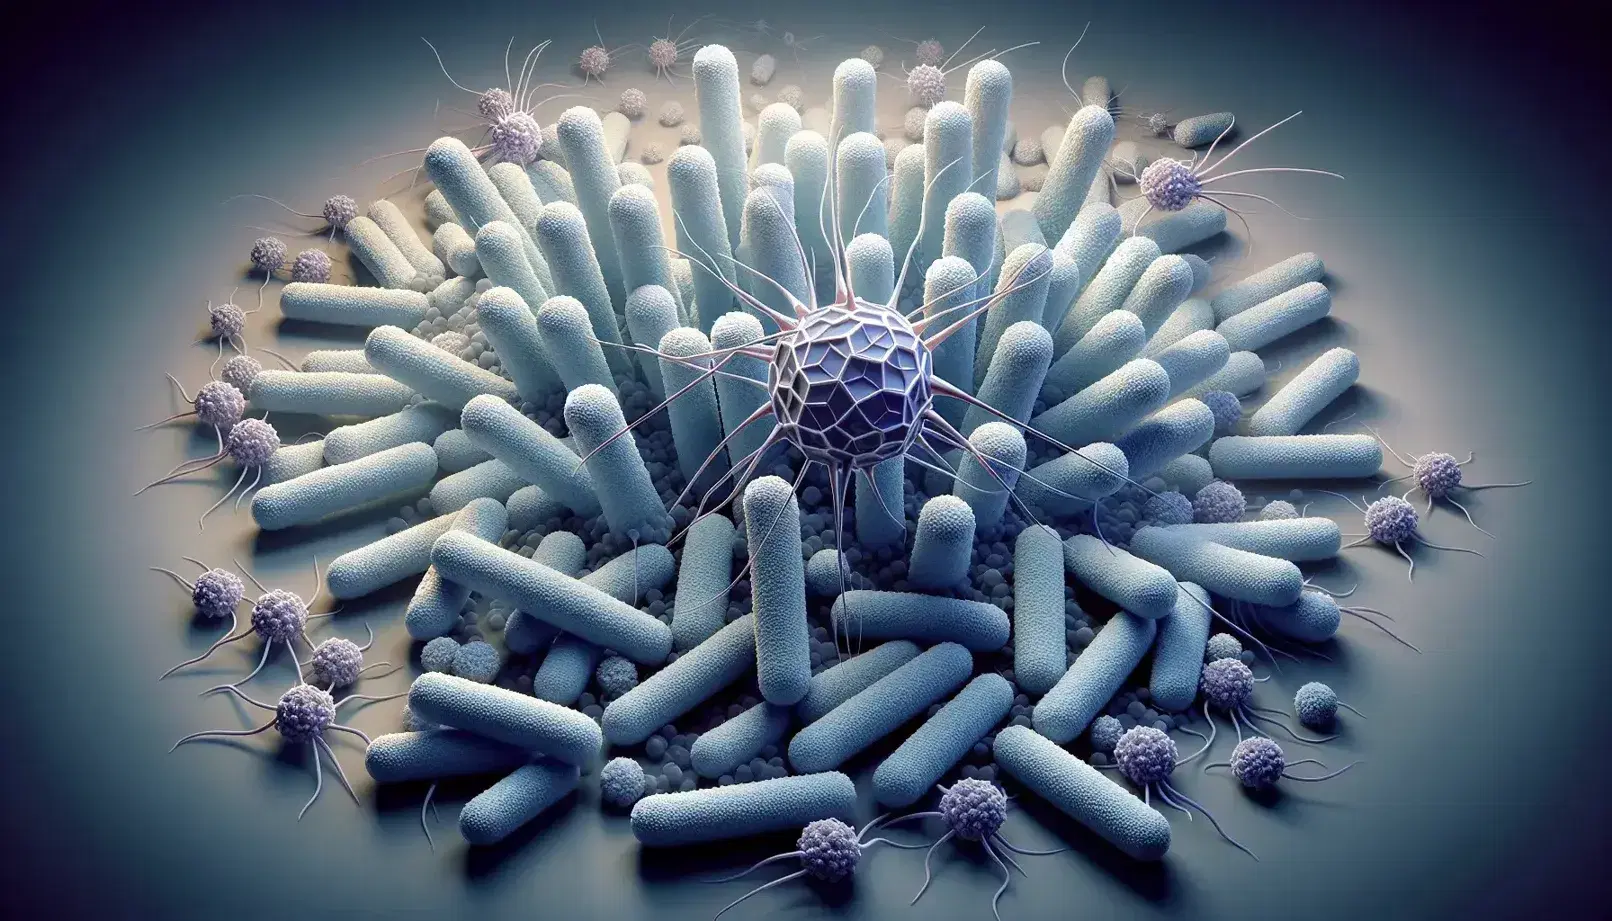 High-magnification view showing rod-shaped bacteria under phage attack, with icosahedral phage heads and spider-like legs, some bacteria lysing.